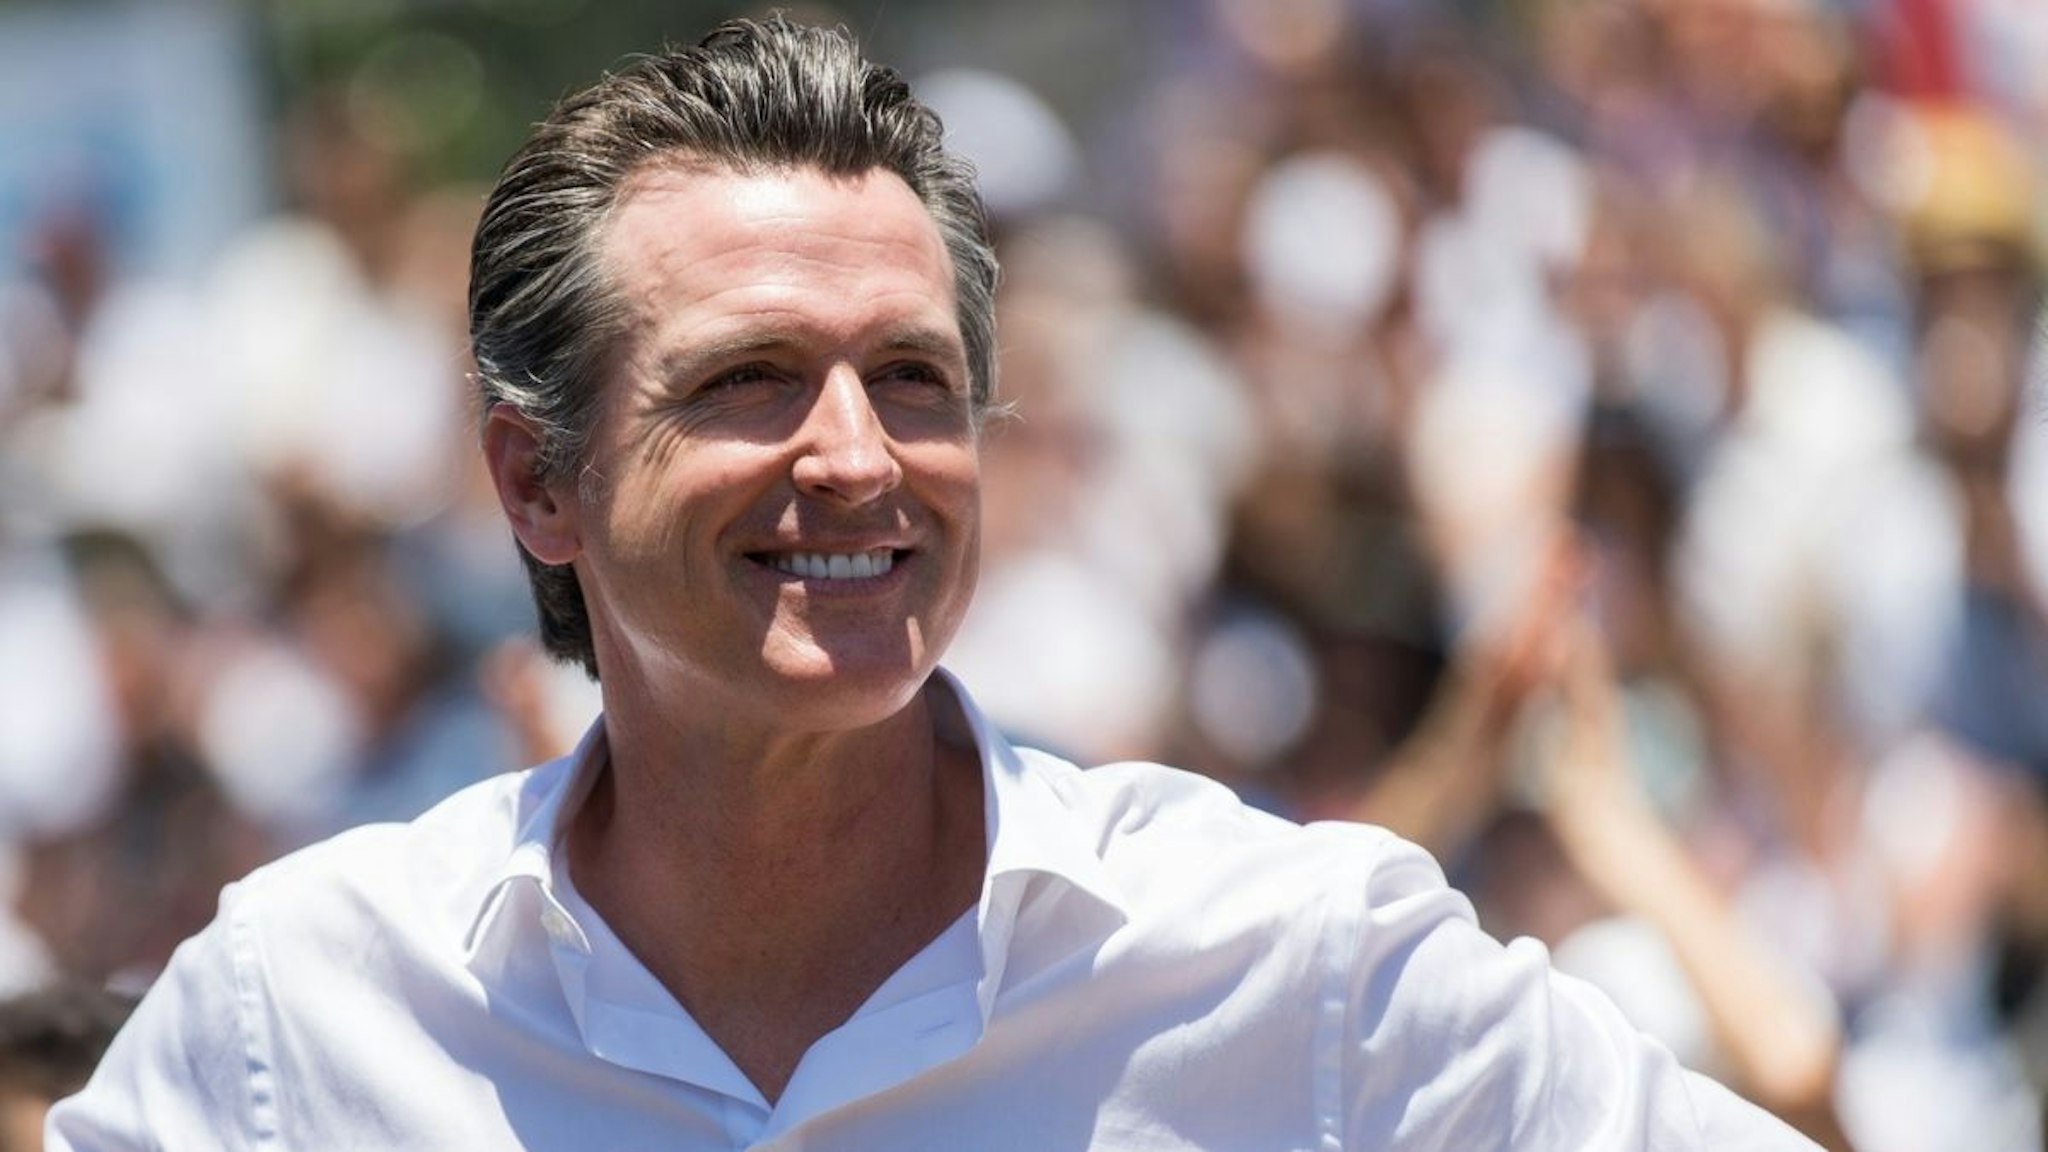 Gavin Newsom attends 'Families Belong Together - Freedom for Immigrants March Los Angeles' at Los Angeles City Hall on June 30, 2018 in Los Angeles, California.